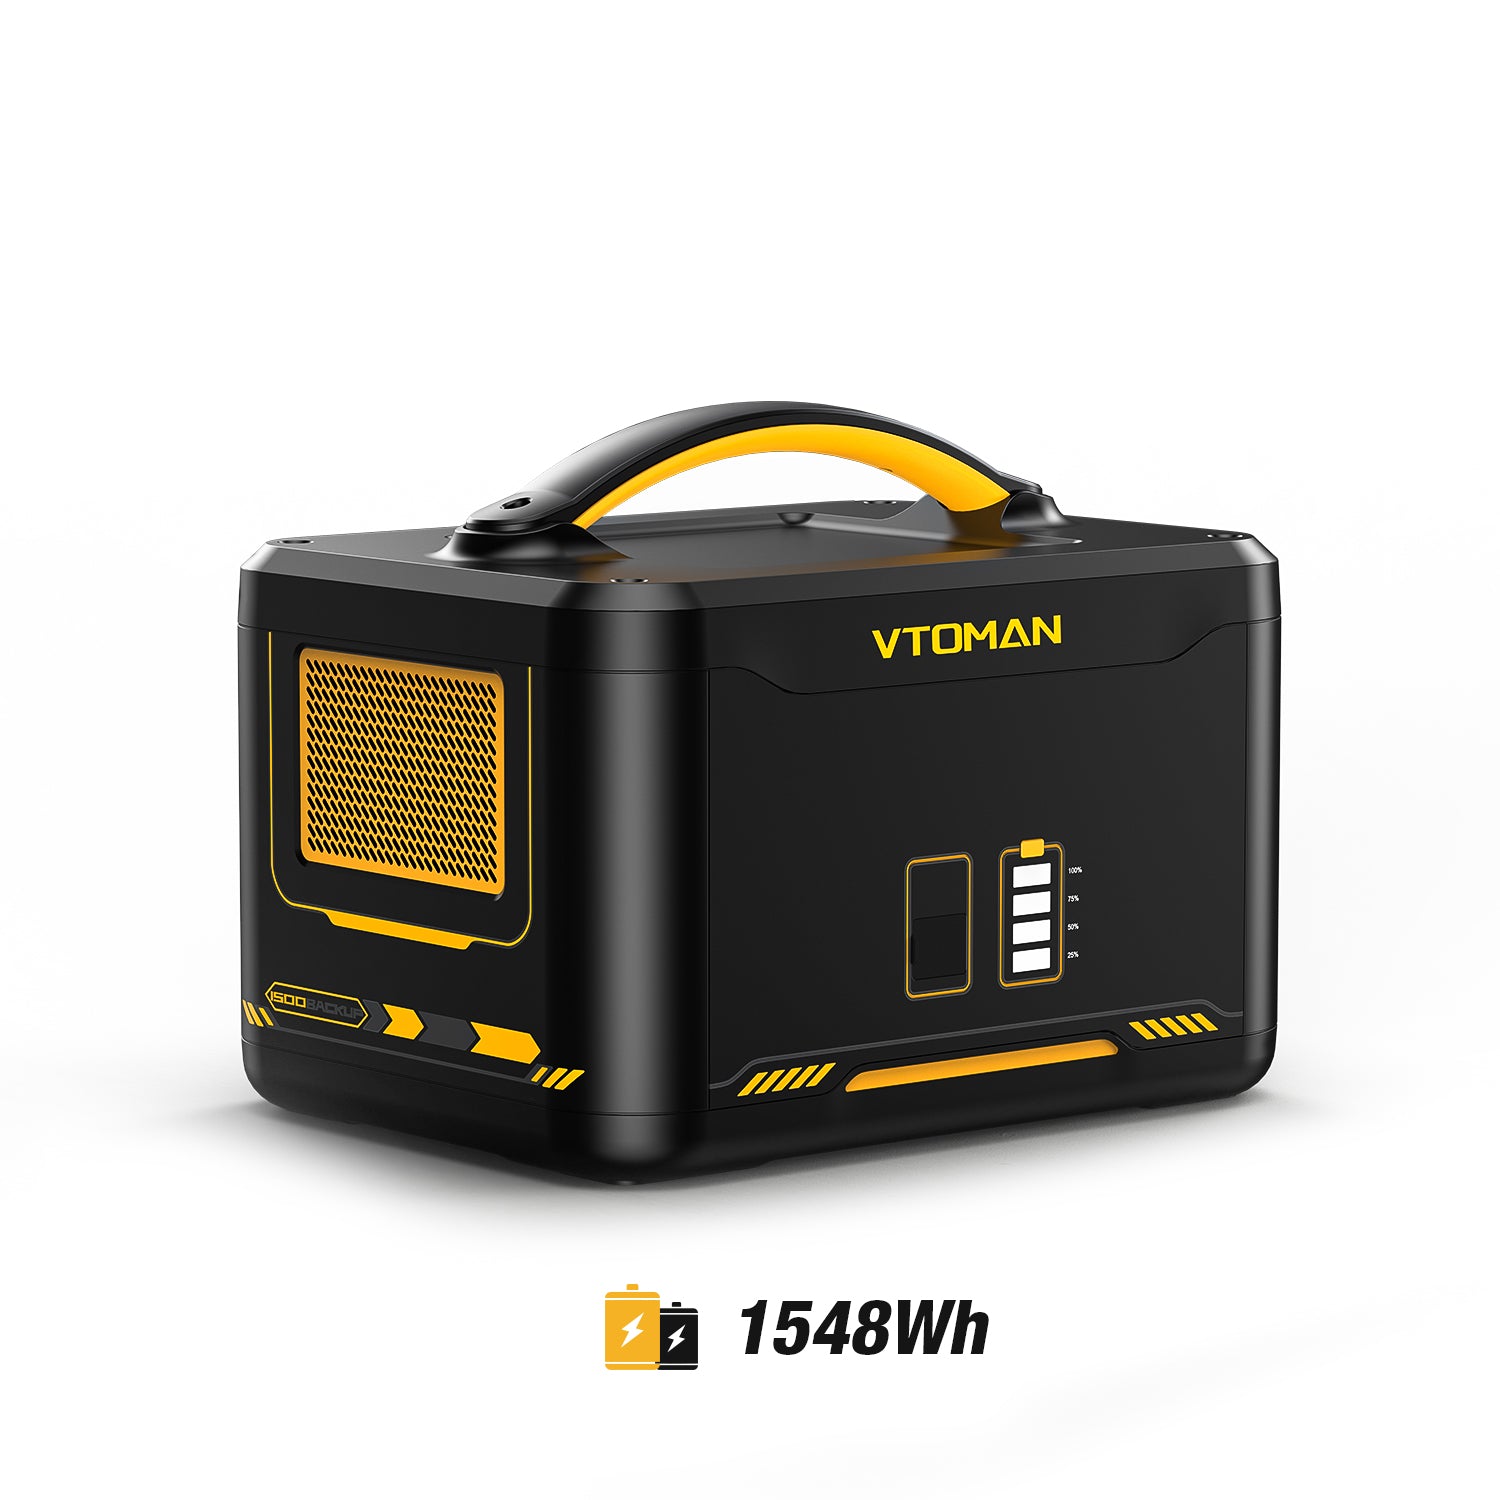 Jump 1500W/3204Wh 220W Solargenerator